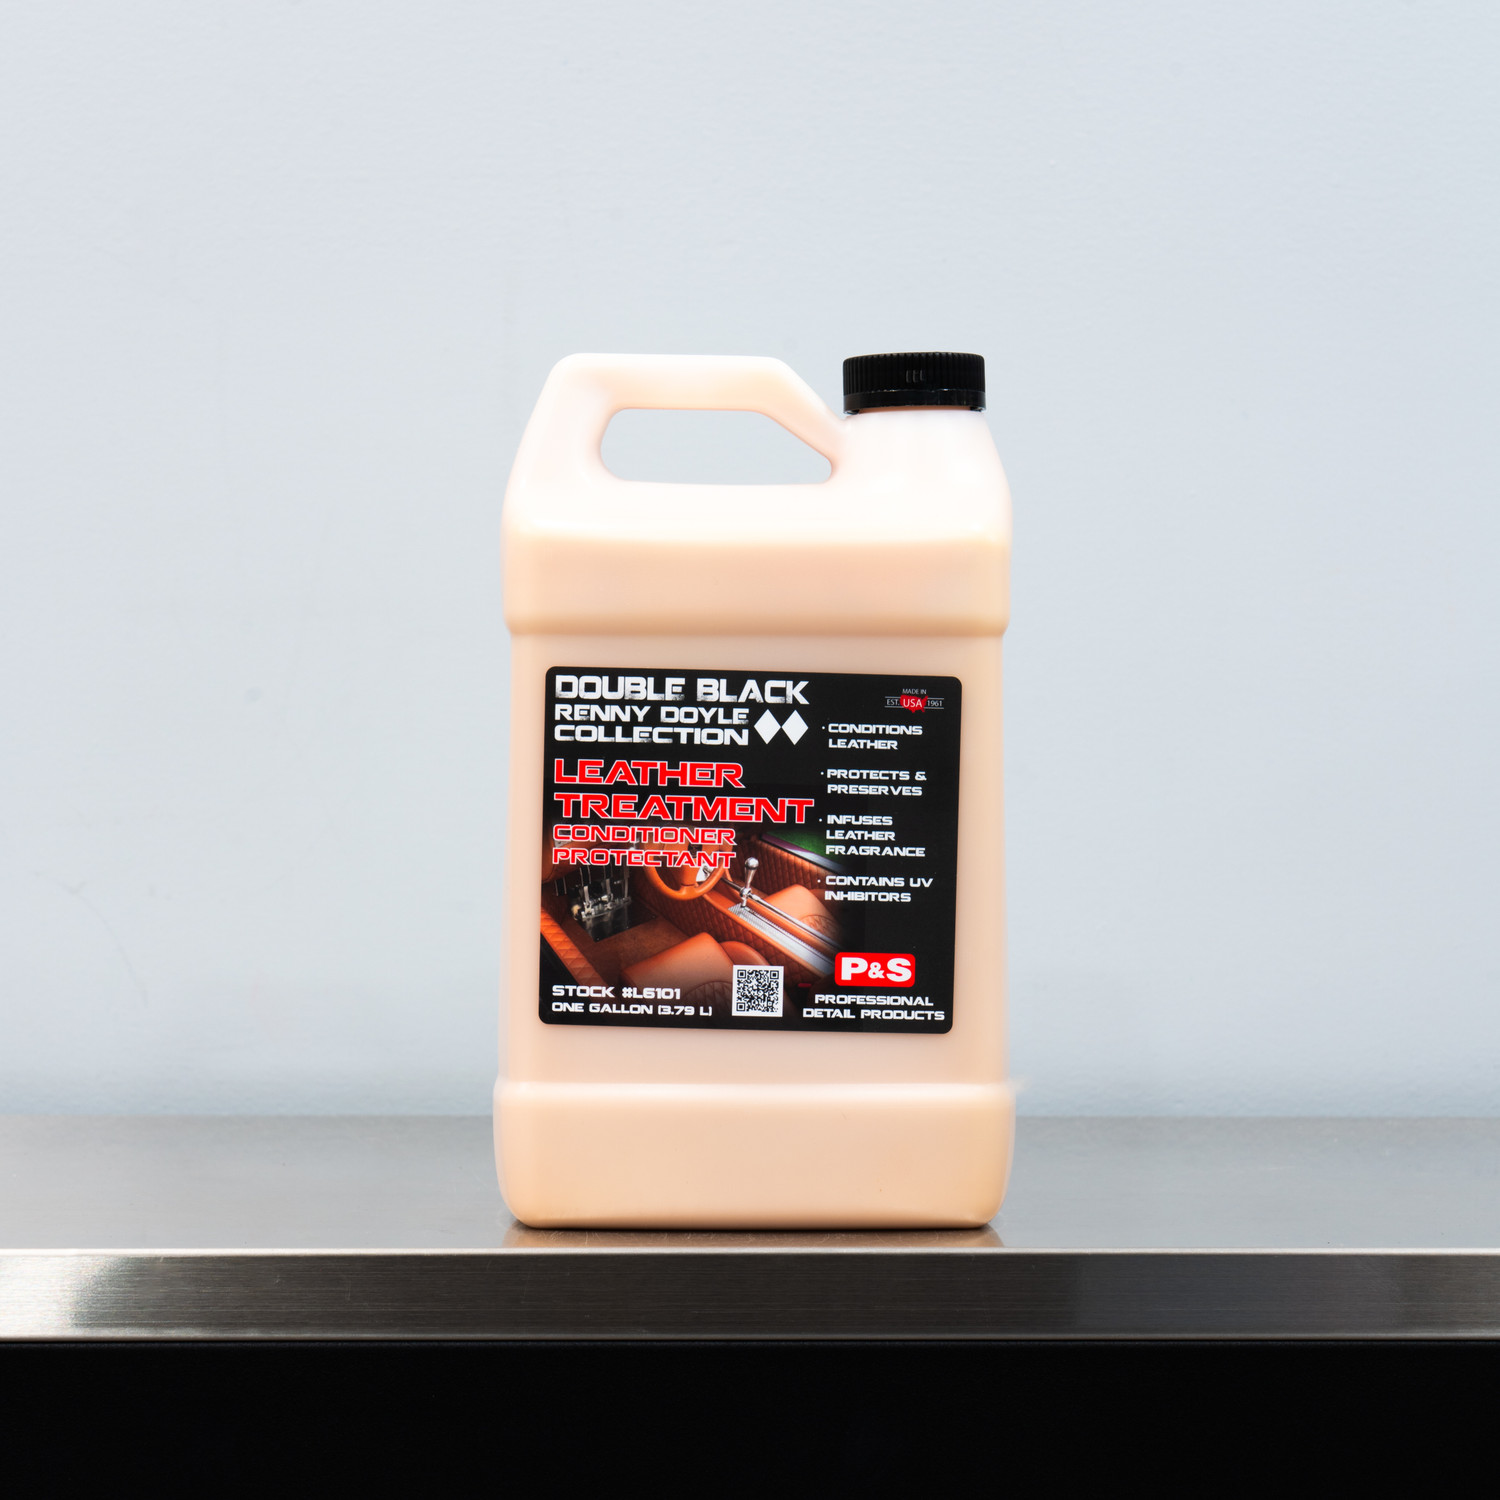 Chemical Guys | Leather Conditioner (1 Gallon)